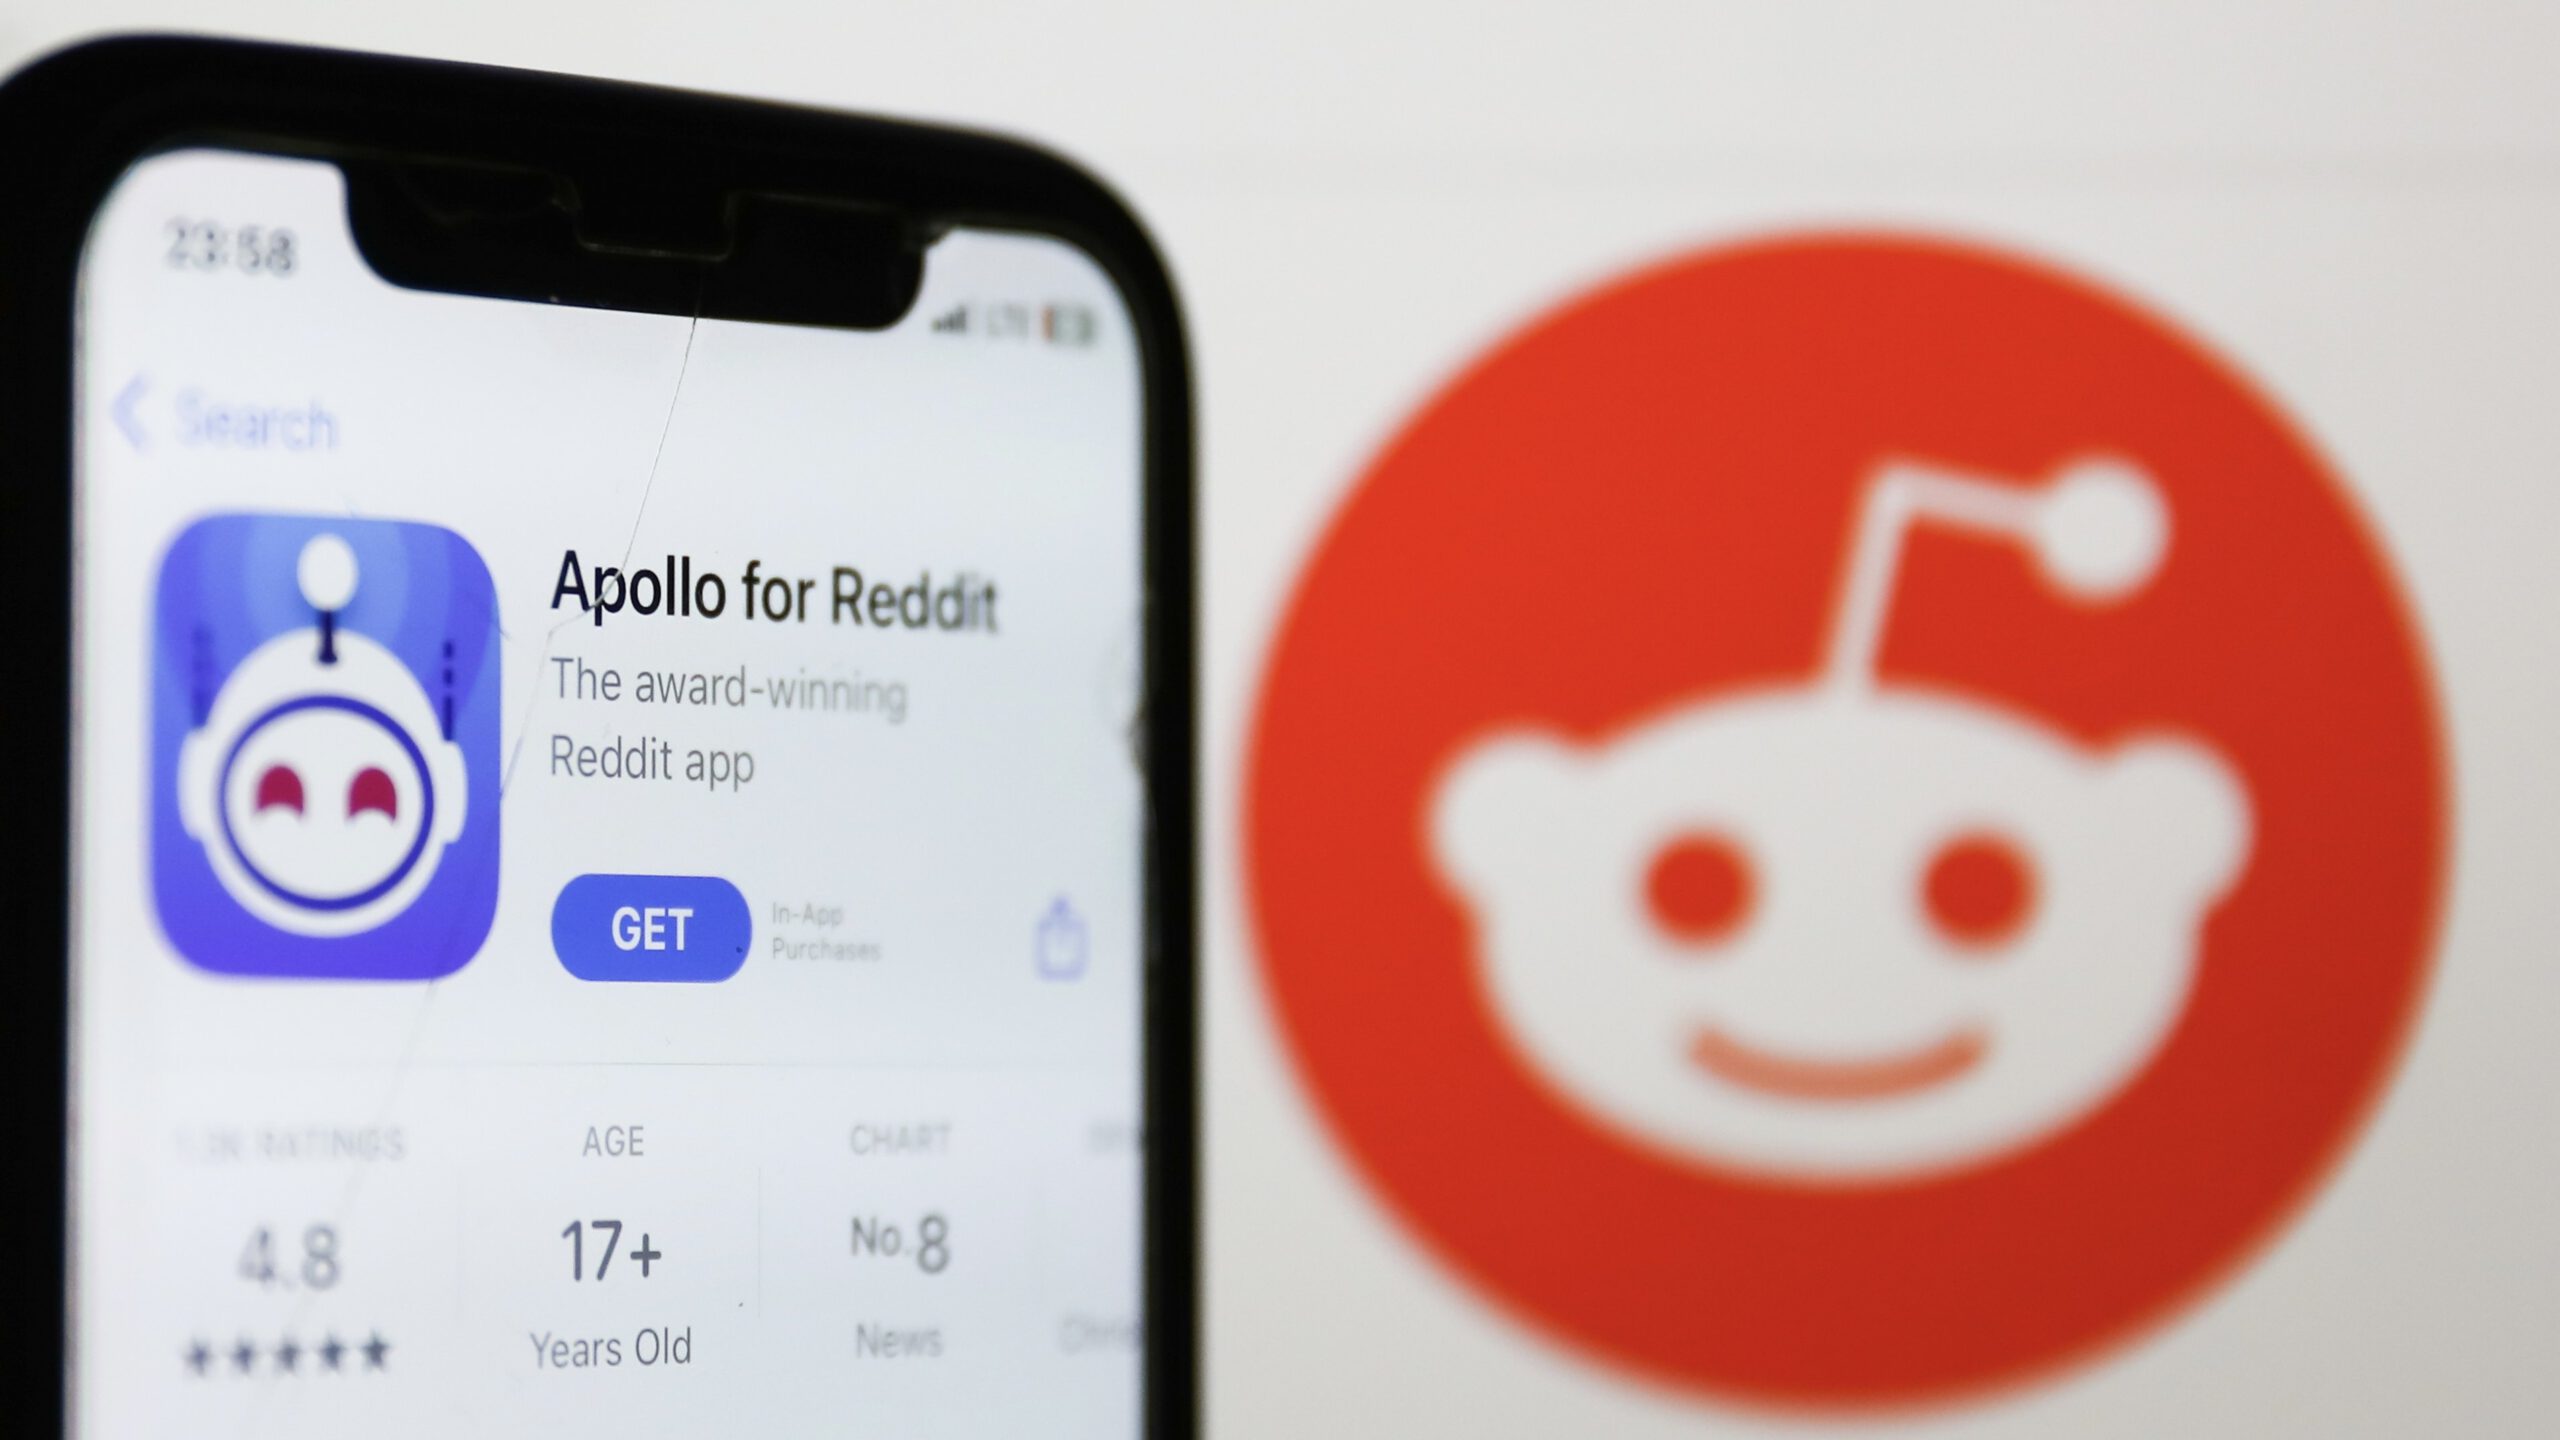 A phone with the app store open to Apollo for Reddit against a white backdrop with the orange Reddit logo.